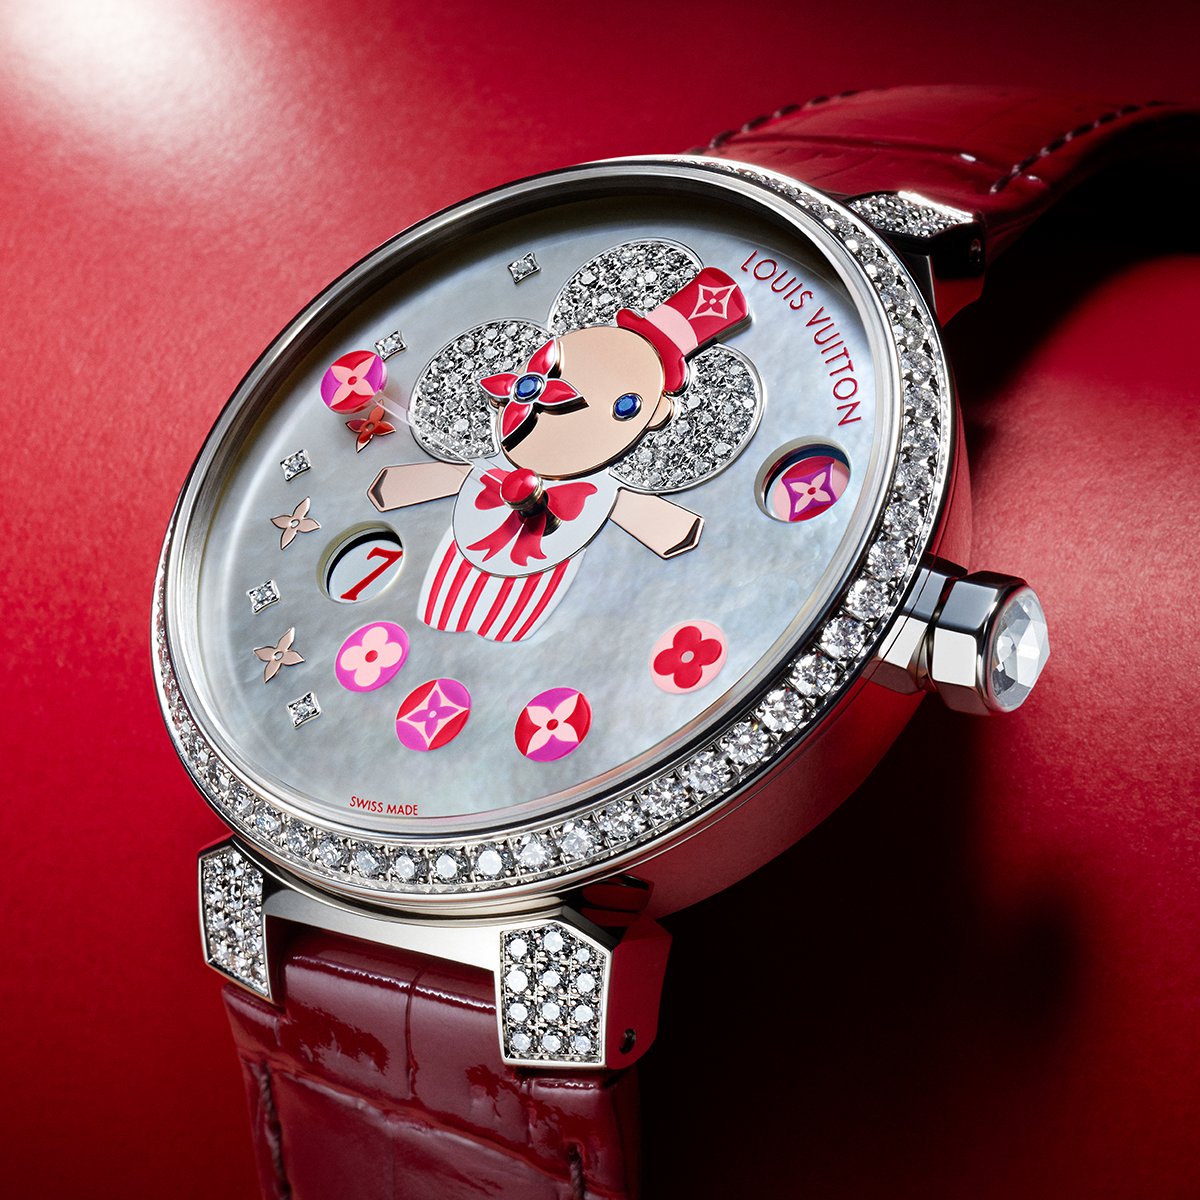 Louis Vuitton on X: Introducing the Tambour Slim Vivienne Jumping Hour.  #LouisVuitton's enigmatic mascot appears in a series of three precious and  playful High Watchmaking creations. Discover the timepieces at   #LVWatches